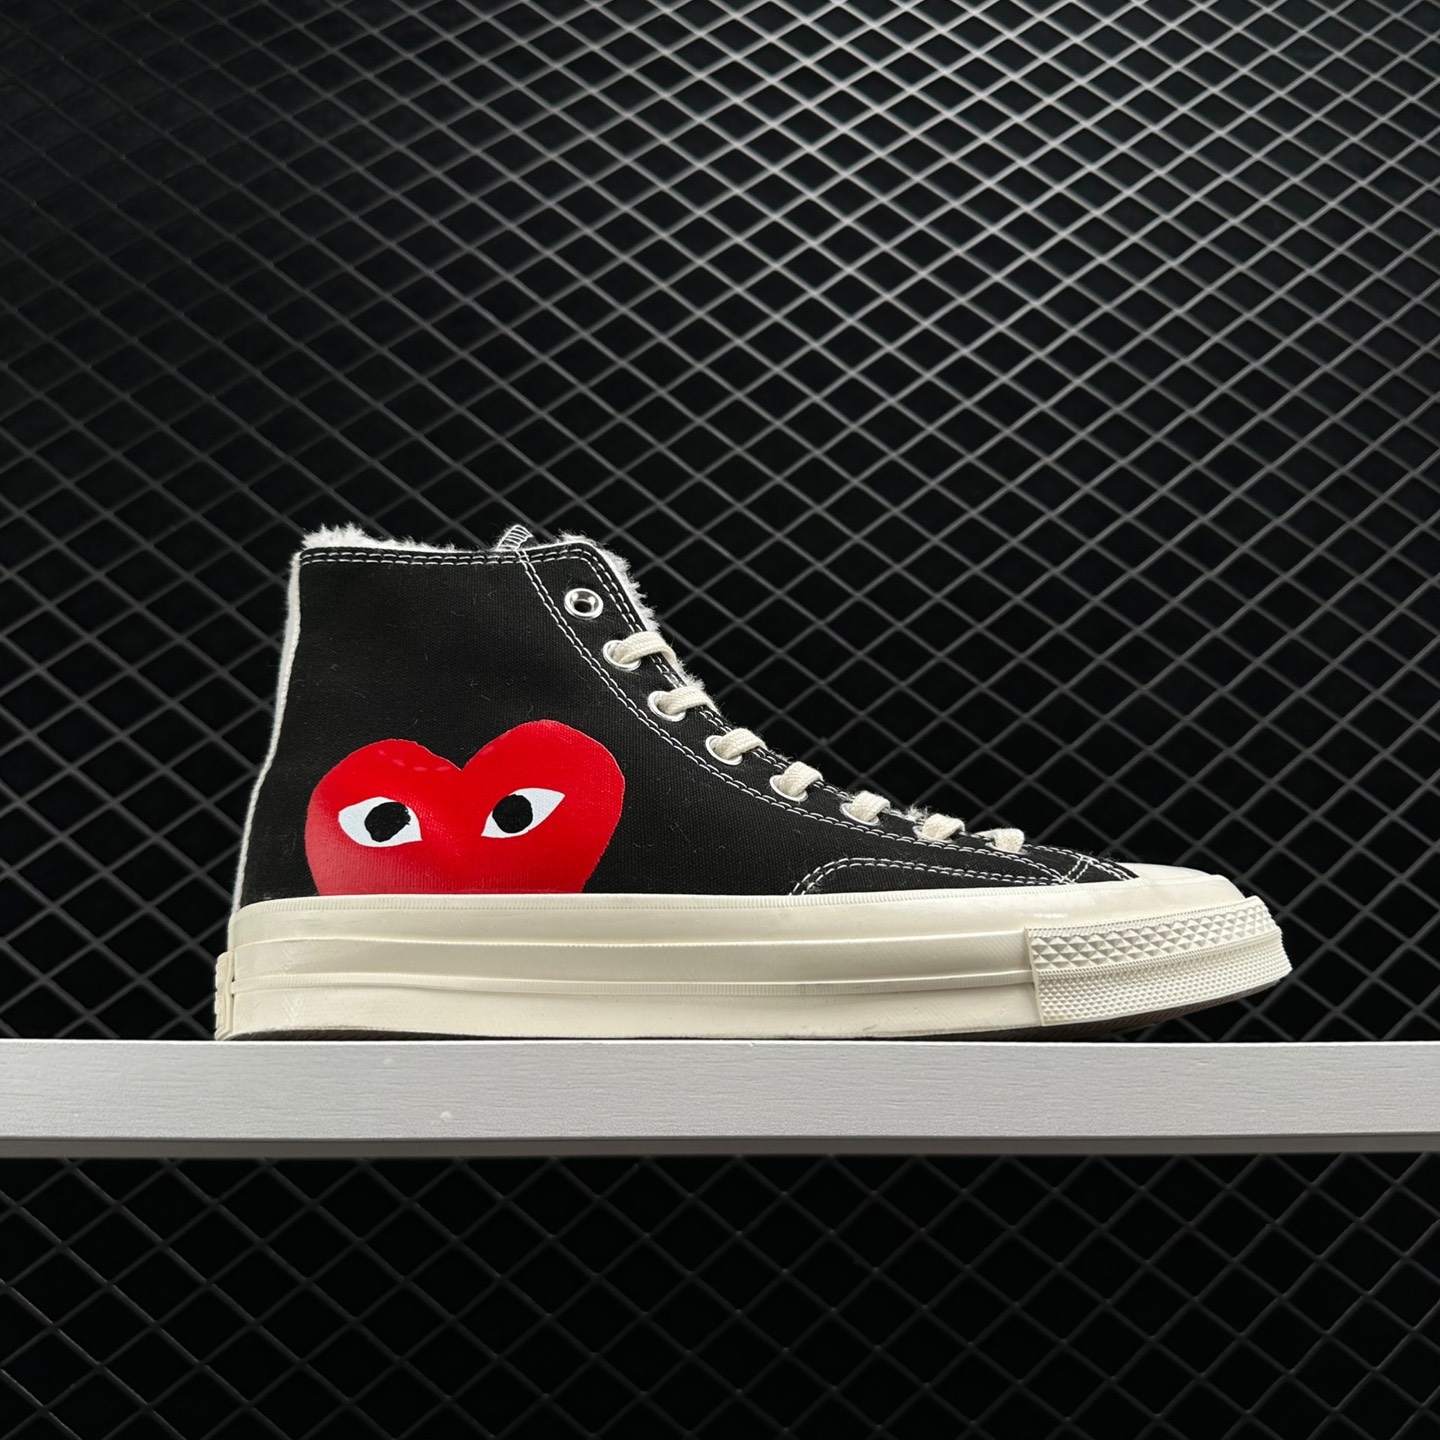 Converse Comme Des Garçons X Chuck Taylor All Star Hi 'Play' 150204C – Limited Edition Sneakers